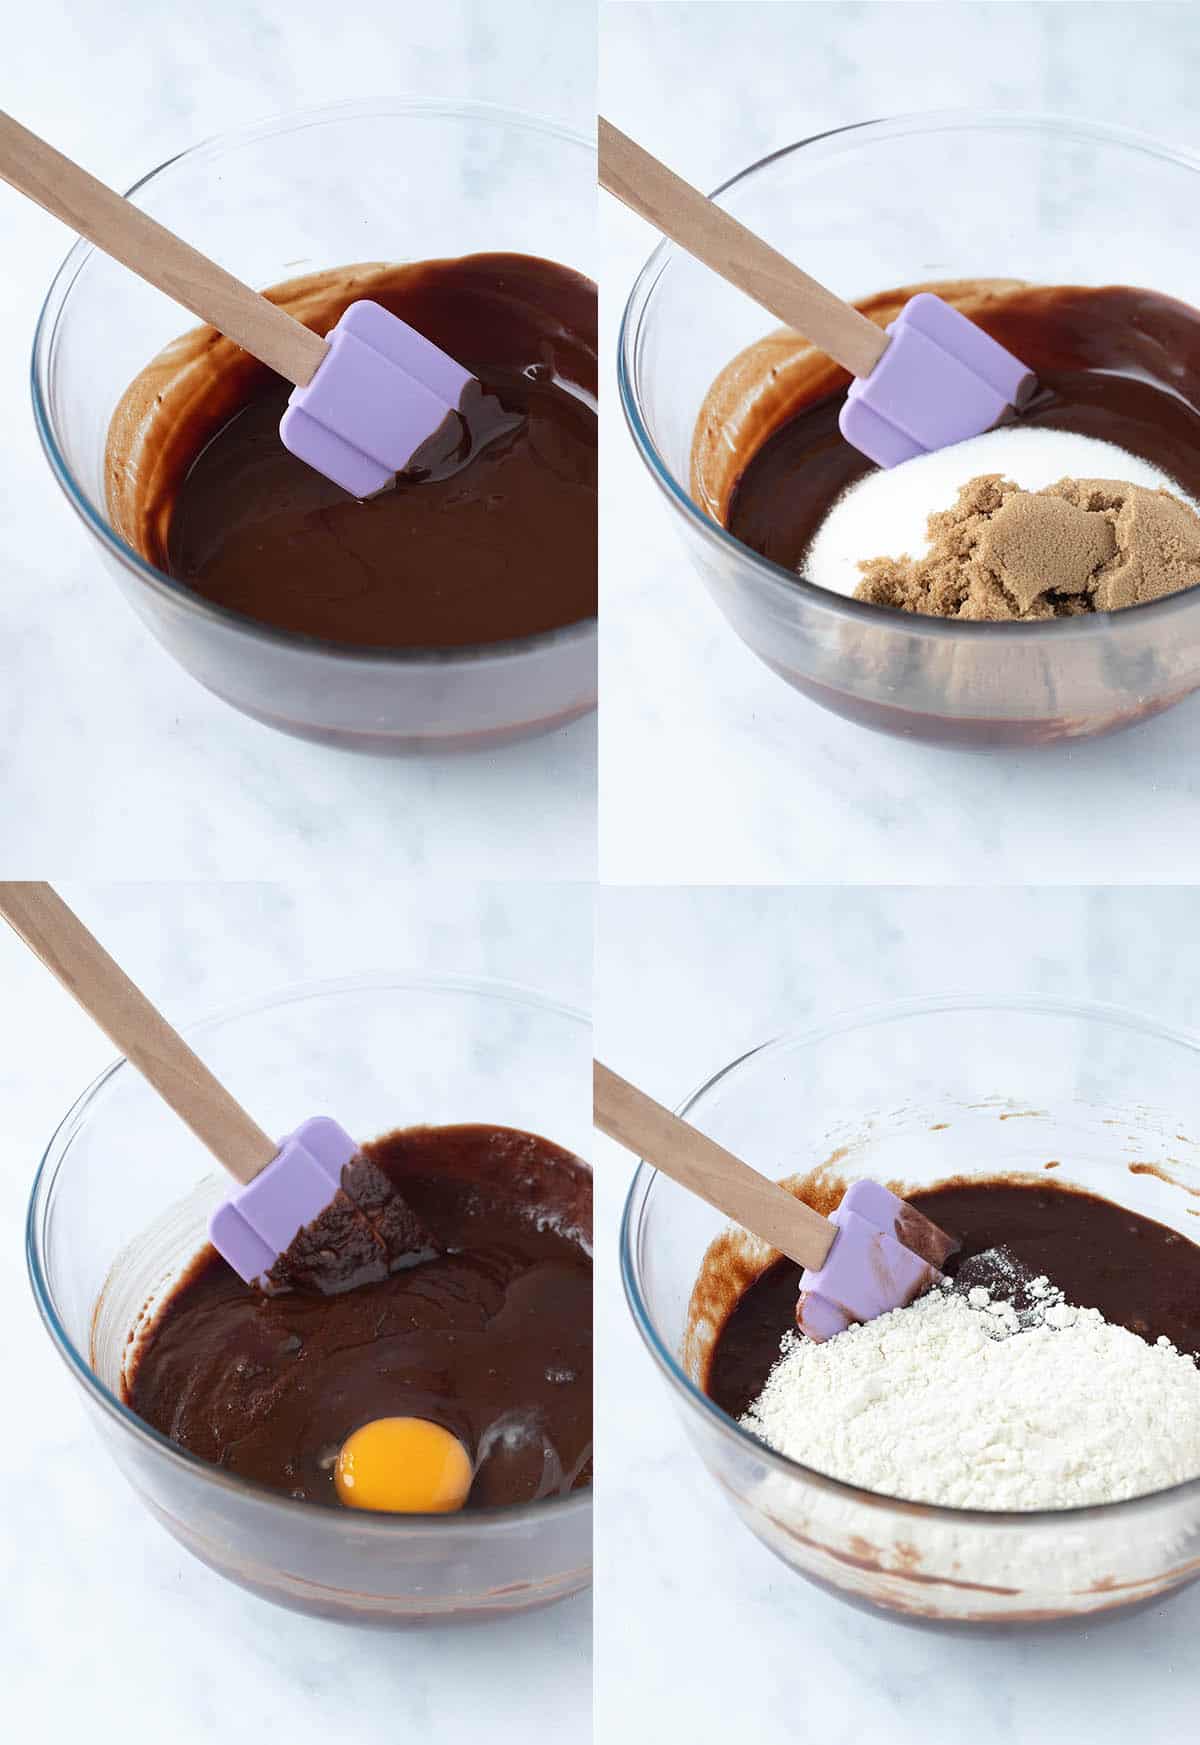 Step by step tutorial showing how to make chocolate brownies from scratch. 